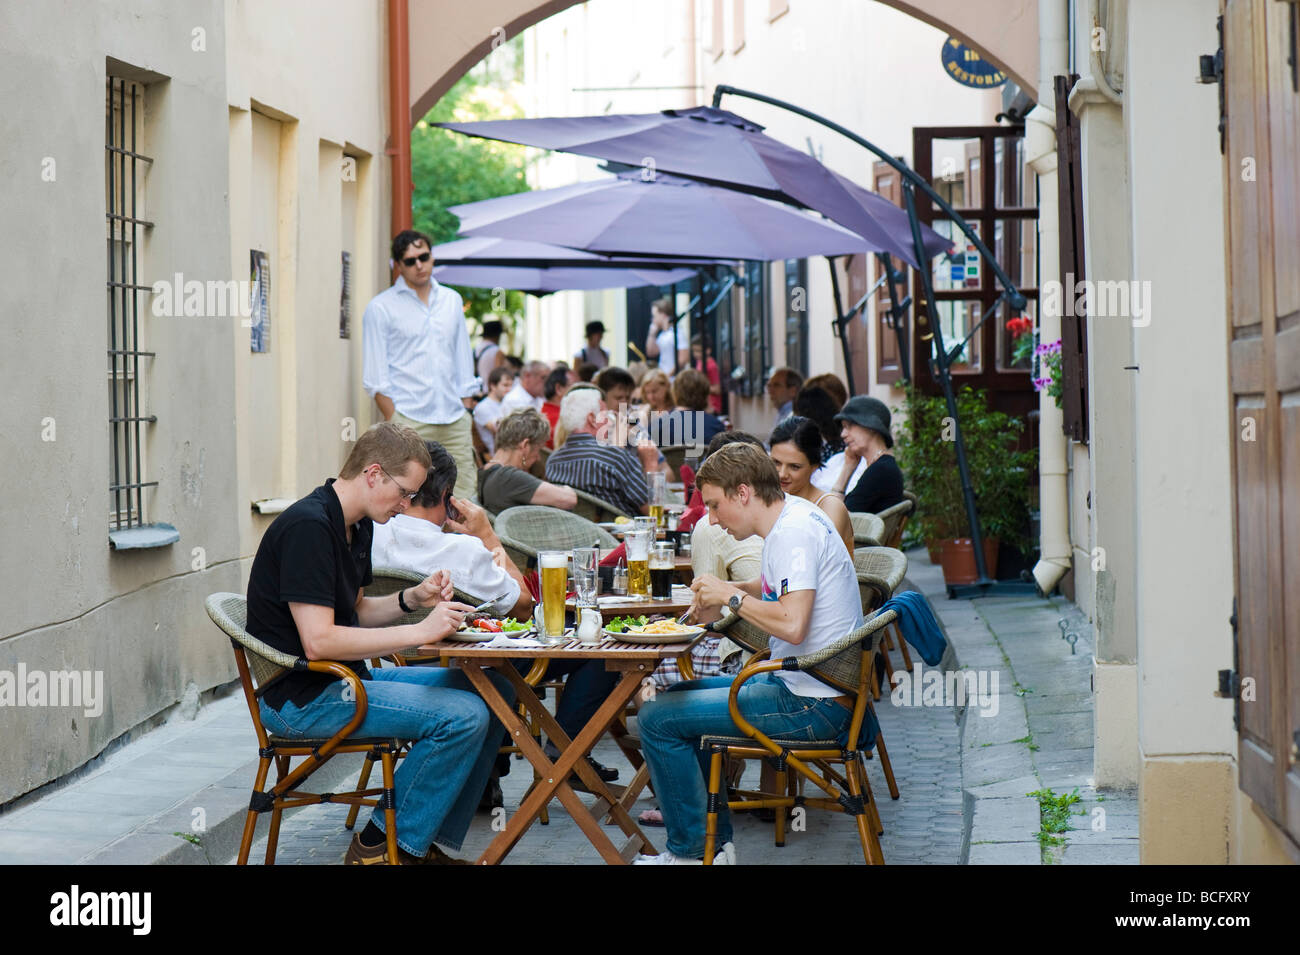 Restaurant on sidewalk busy with diners Old Town Vilnius Lithuania Stock Photo